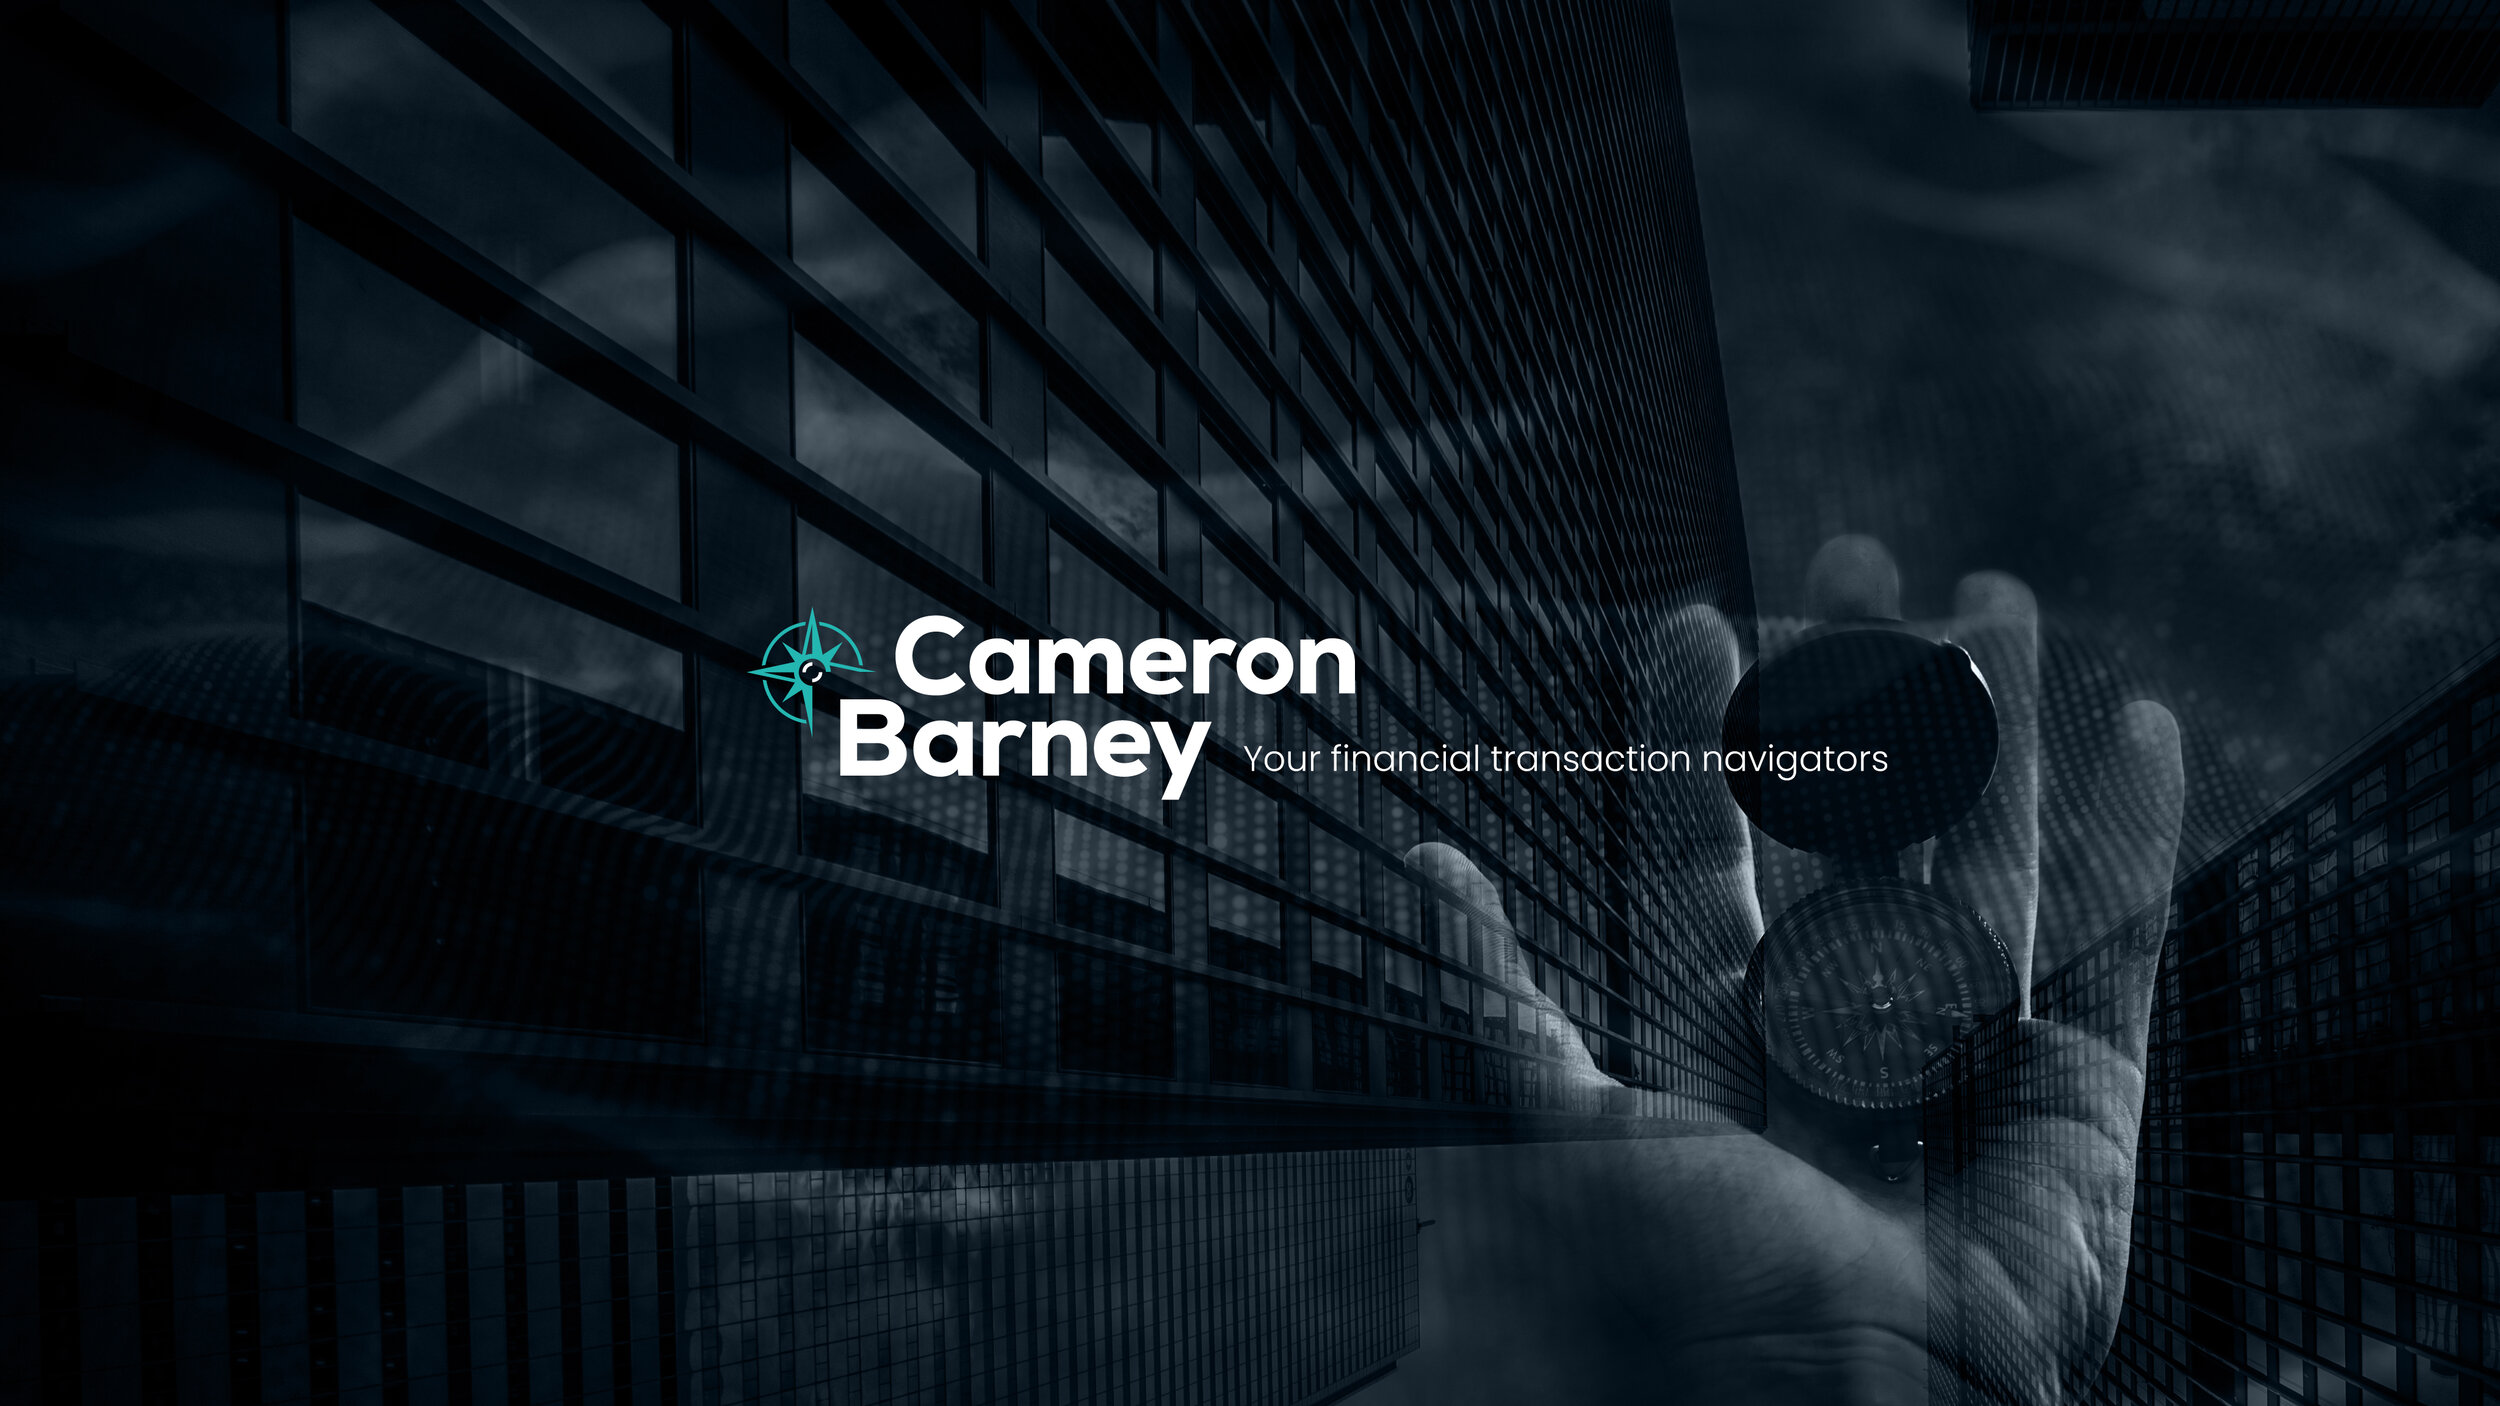 &lt;strong&gt;Cameron Barney＿&lt;/strong&gt;&lt;p&gt;Investing in the future&lt;br&gt;&amp;nbsp&lt;/p&gt;